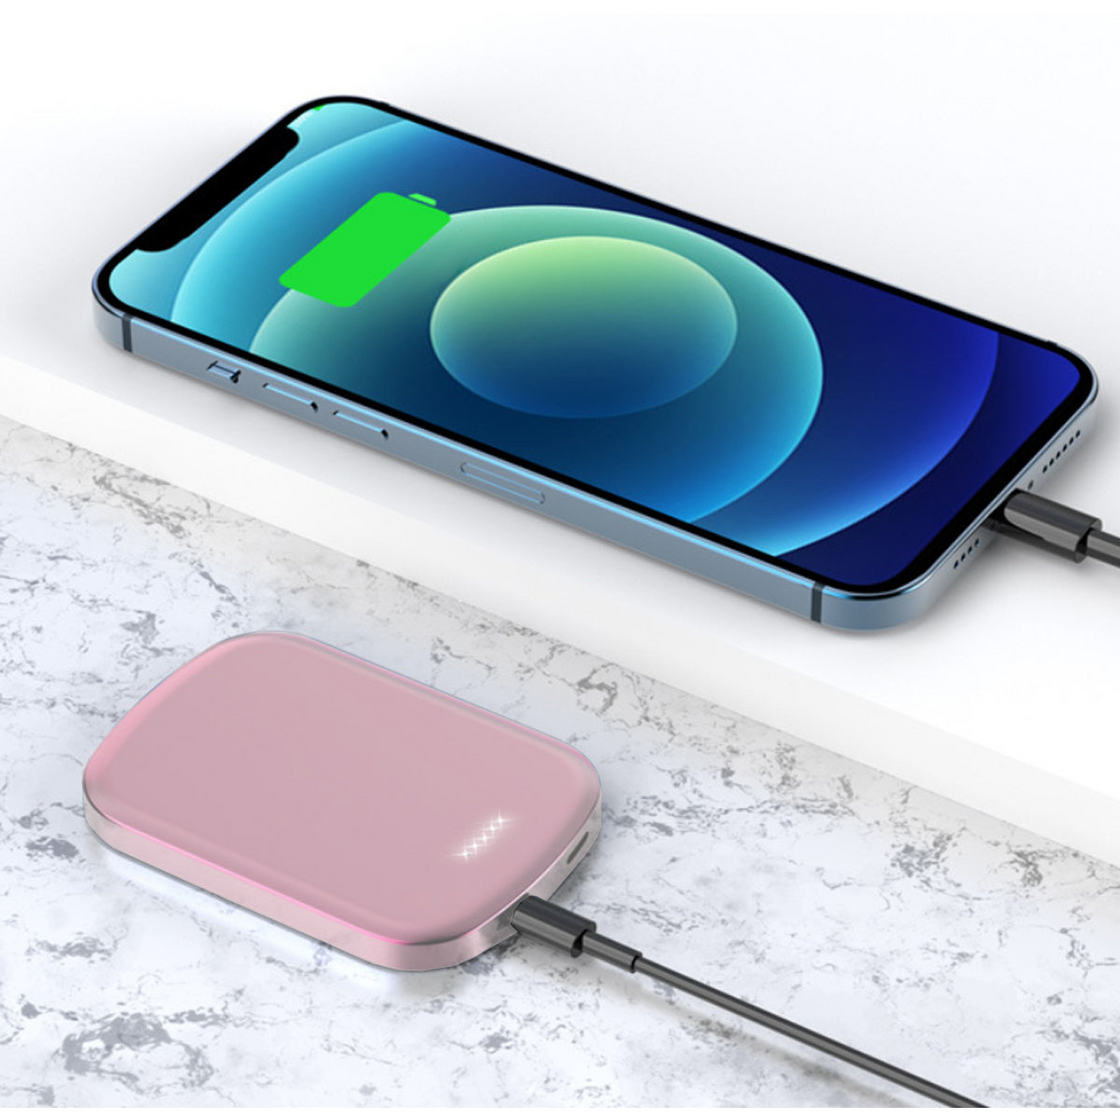 Chargomate Magnetic Portable Wireless Charger and Power Bank for Apple and Android